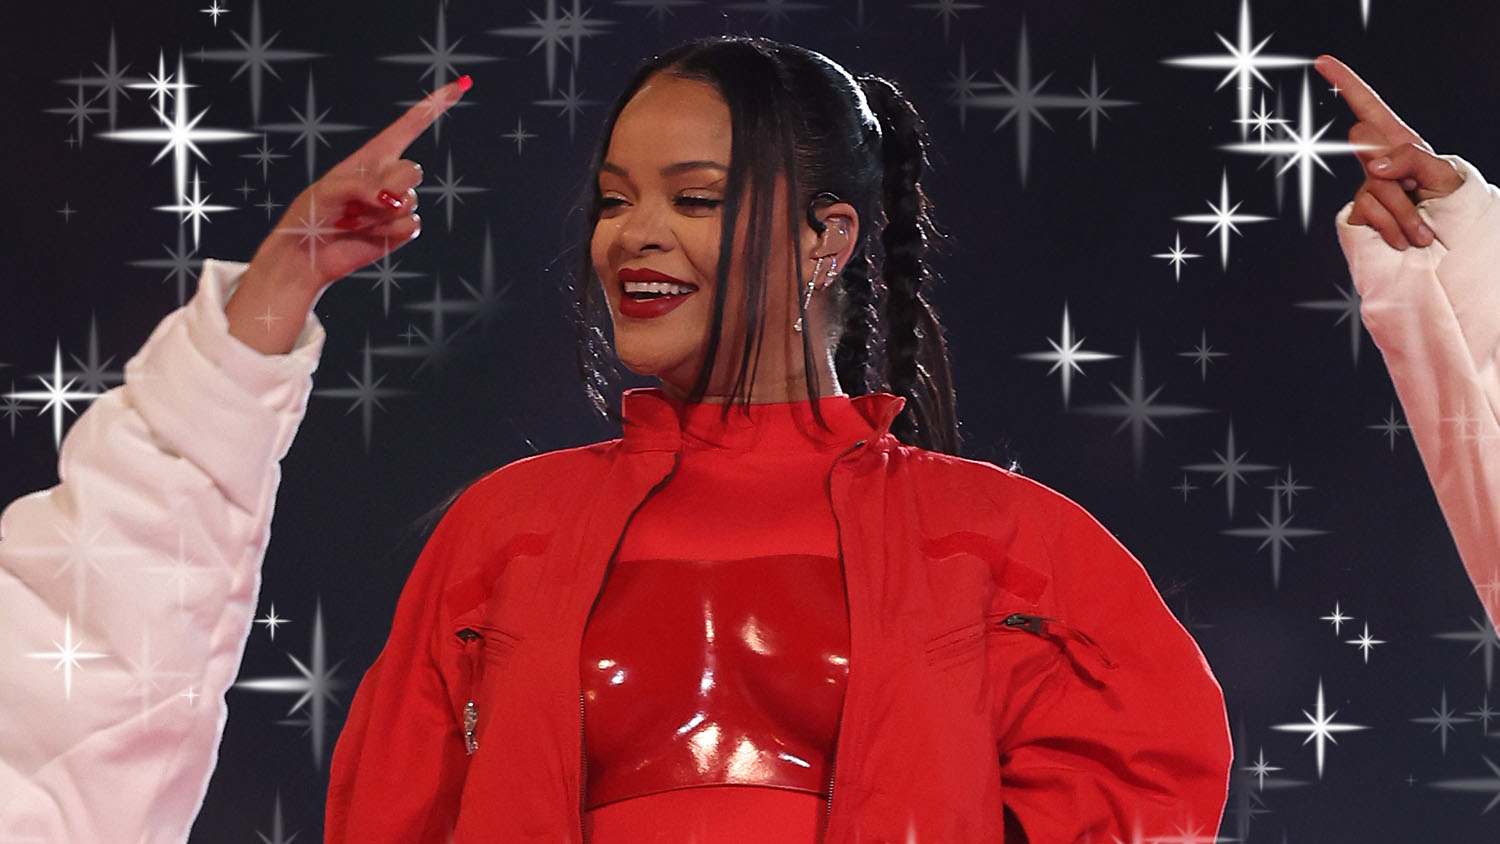 How Rihanna Became the Most Stylish Pop Star of Her Generation